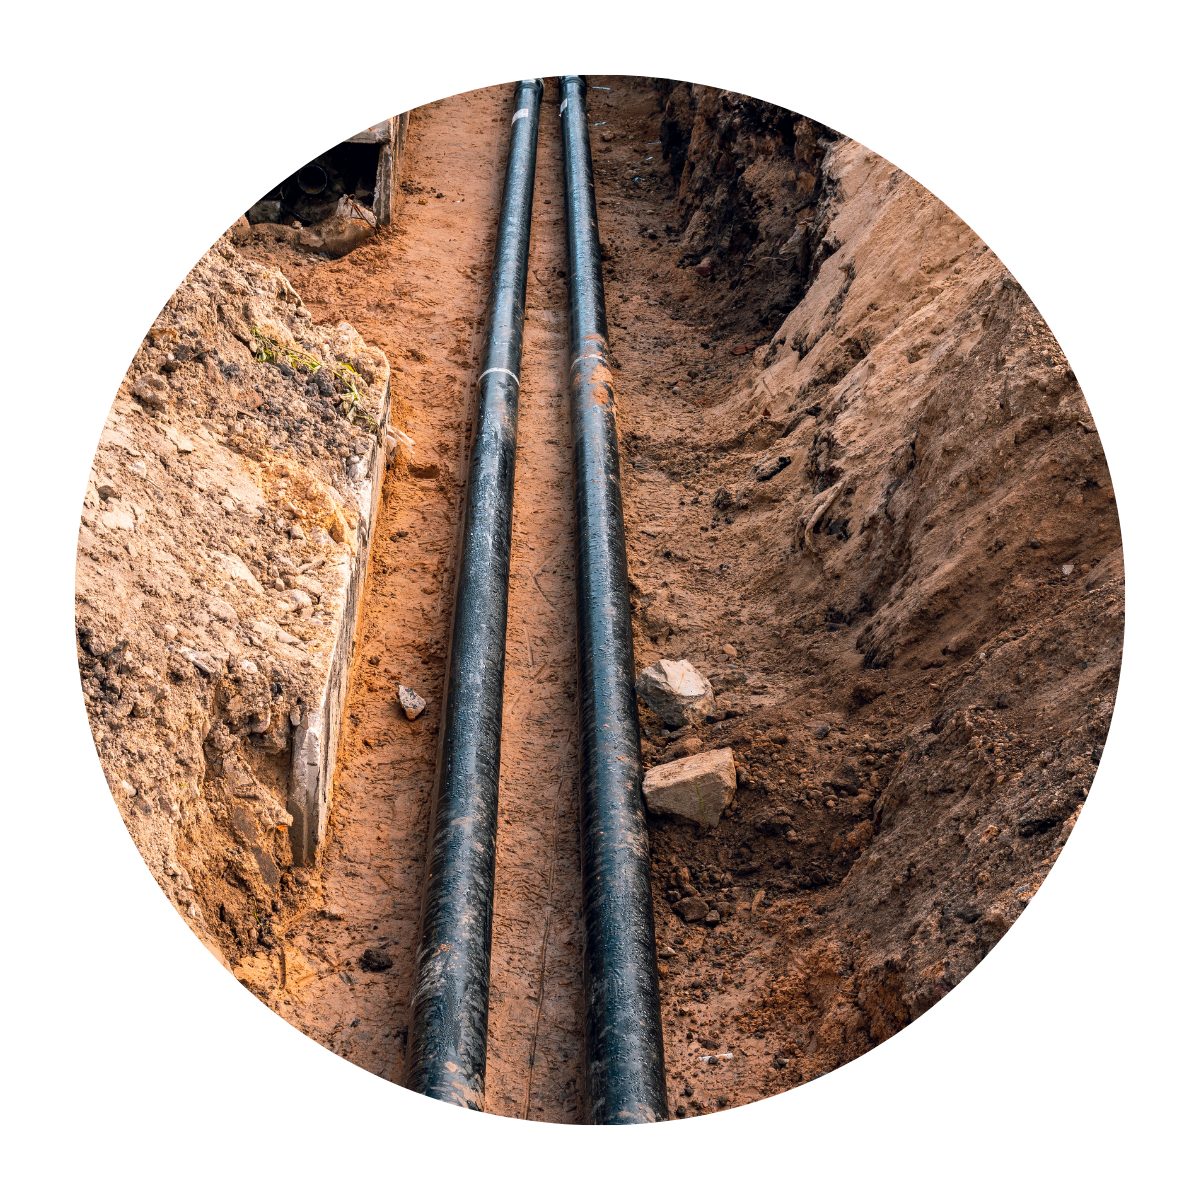 Water pipes in ground